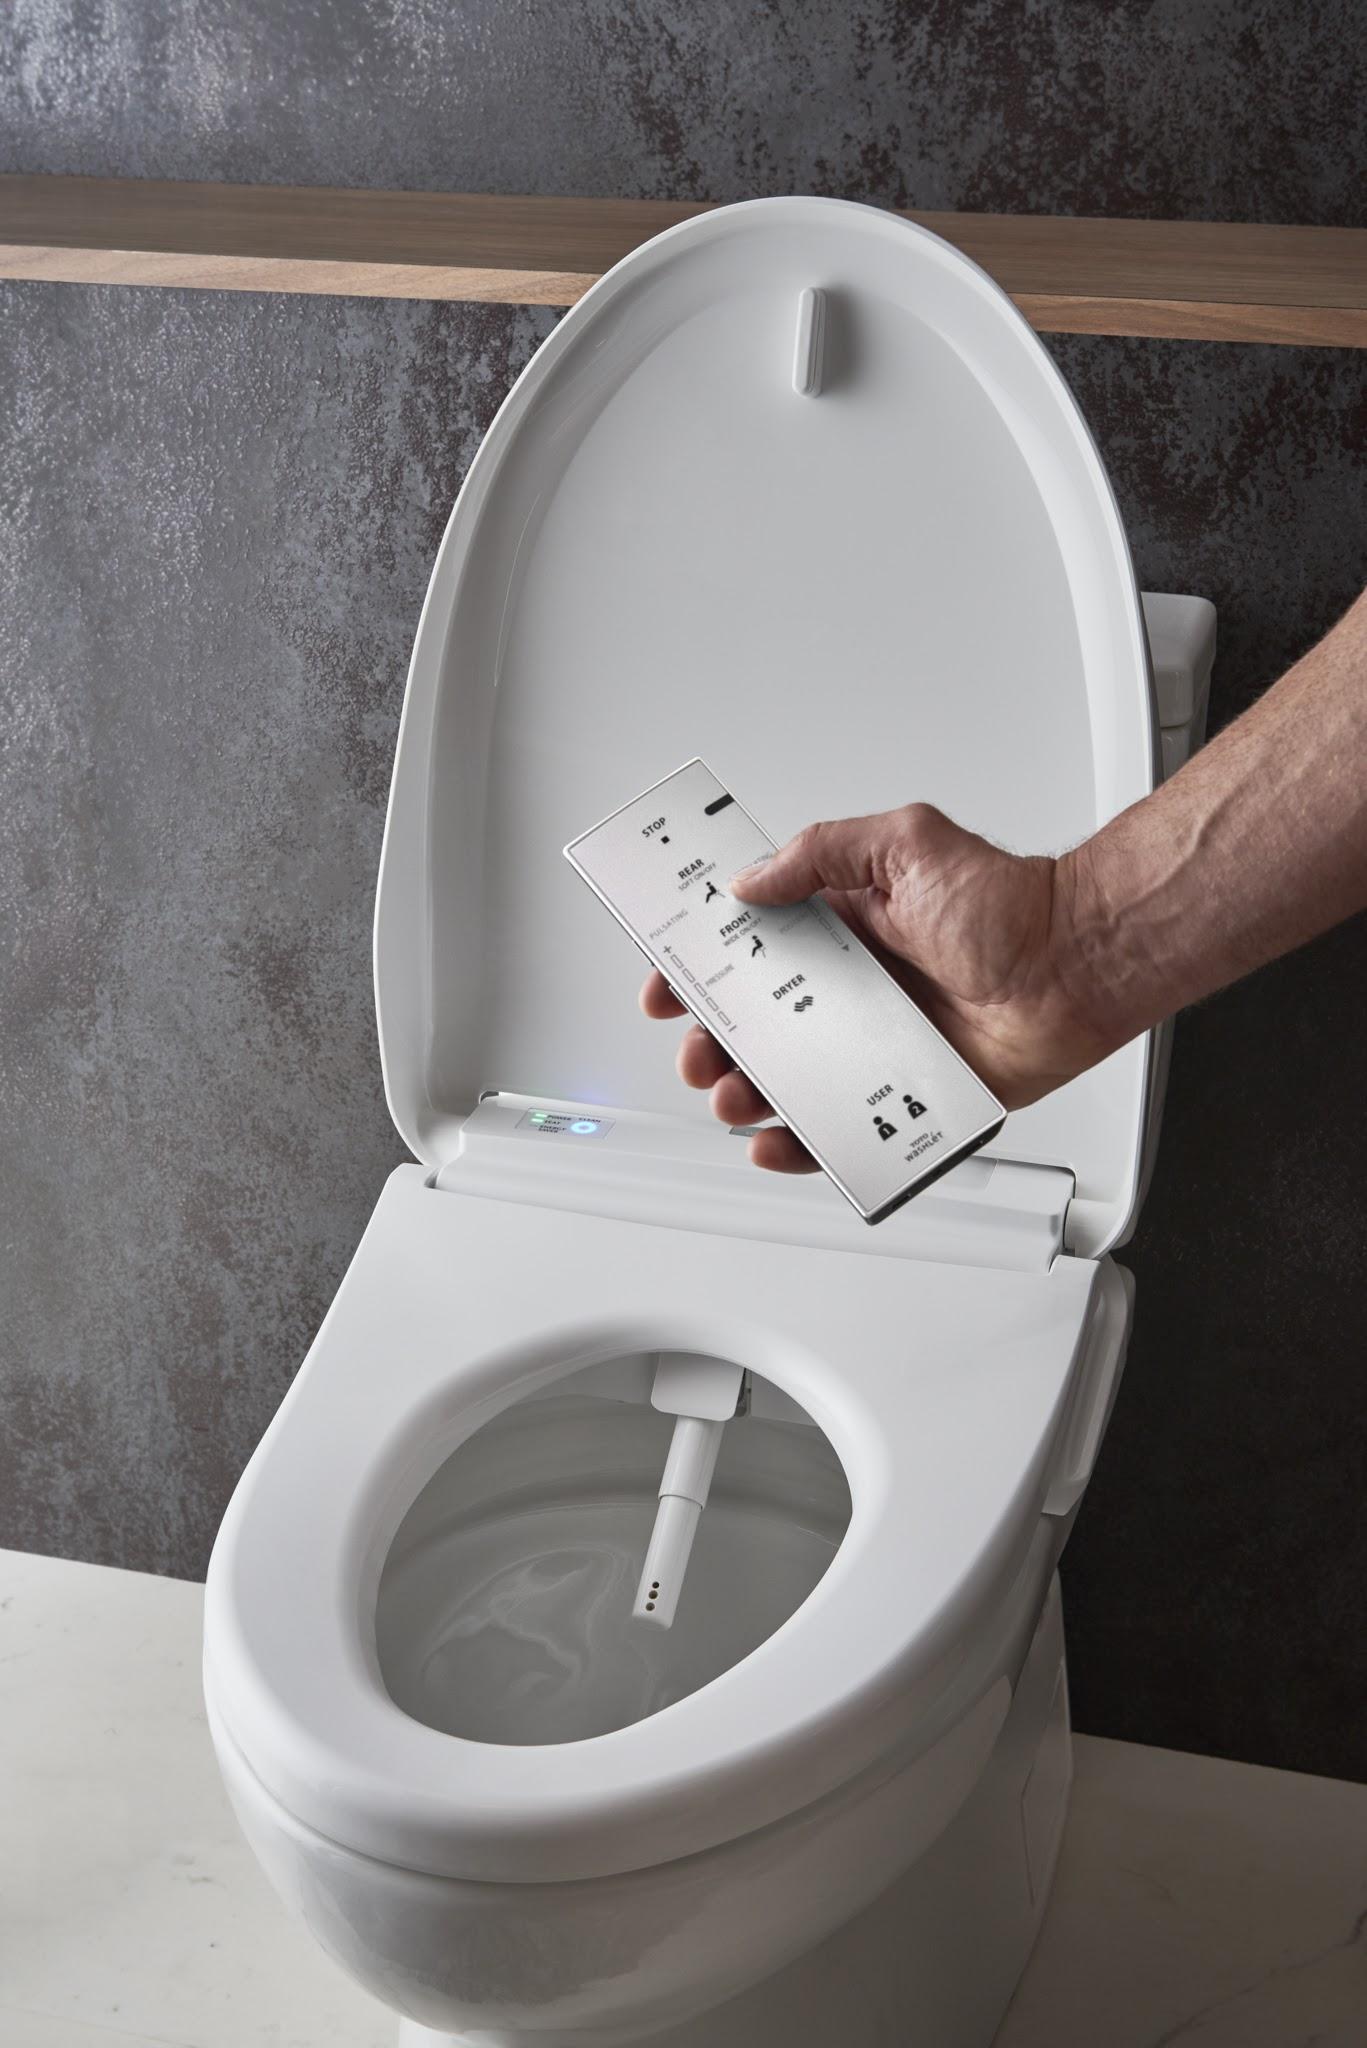  TOTO  s High Tech Toilet Combines Aesthetics With 